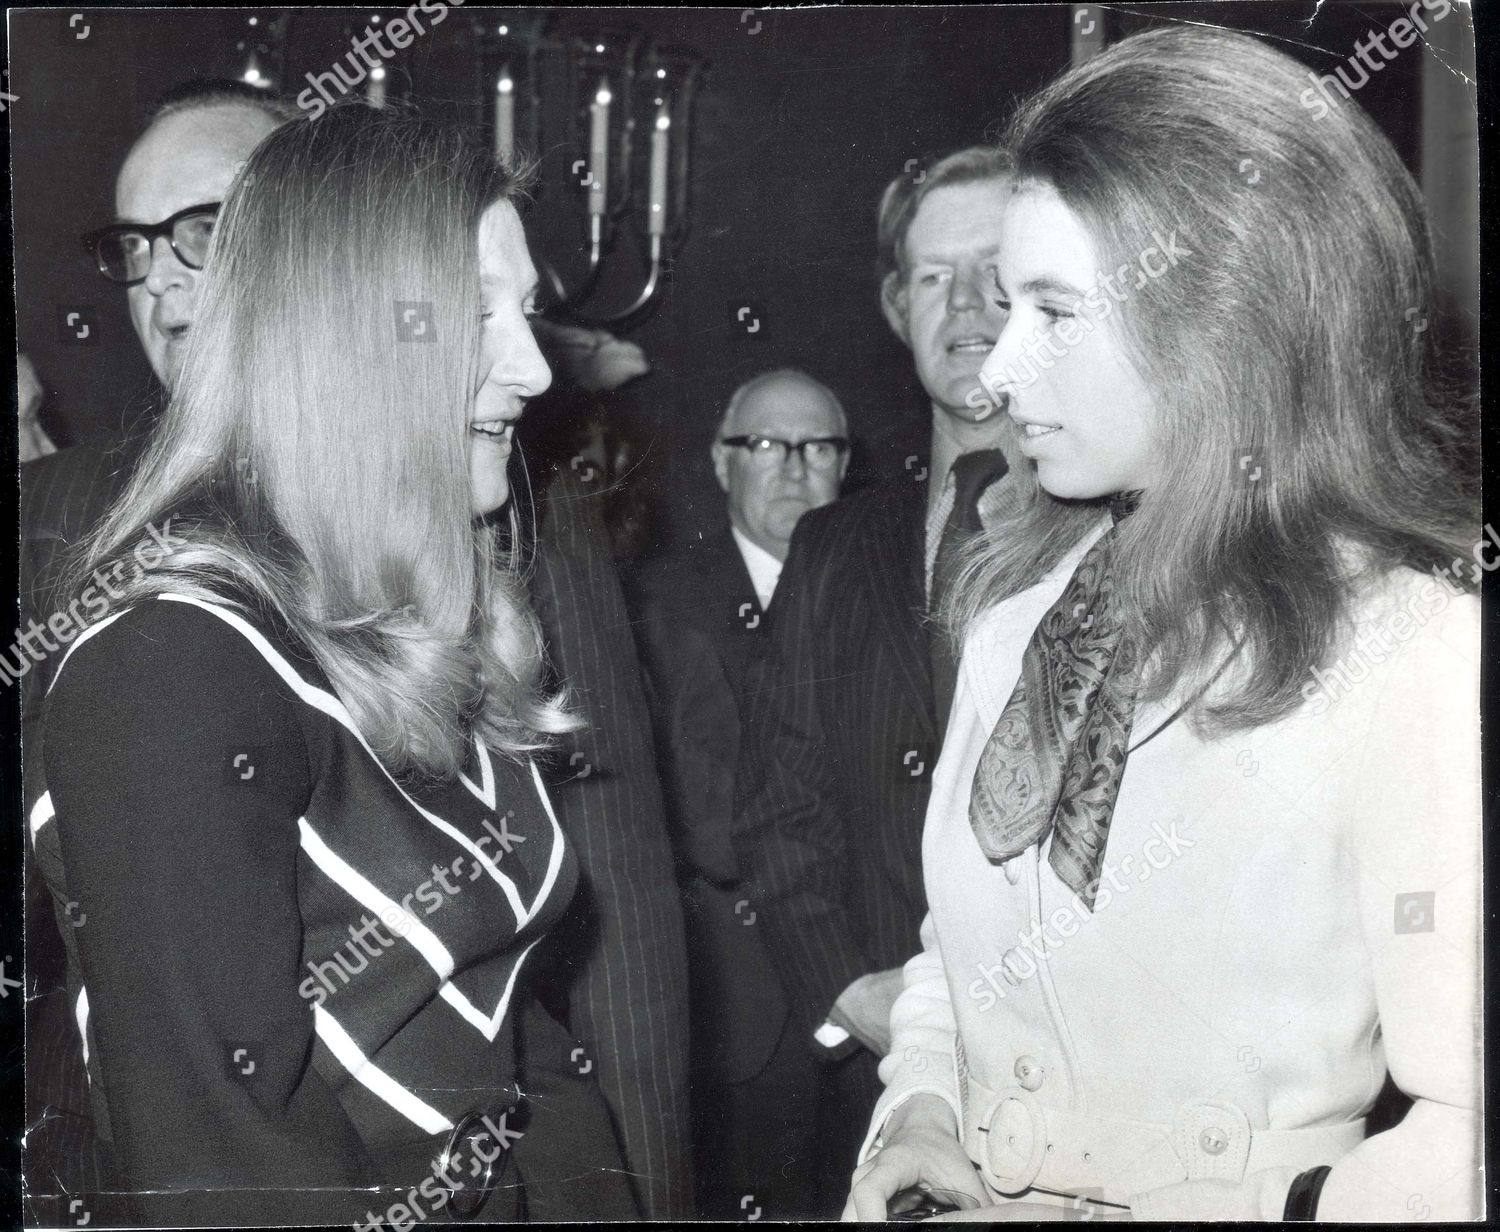 princess-anne-now-princess-royal-november-1972-sports-lunch-at-savoy-mary-peters-and-princess-anne-royalty-shutterstock-editorial-896299a.jpg